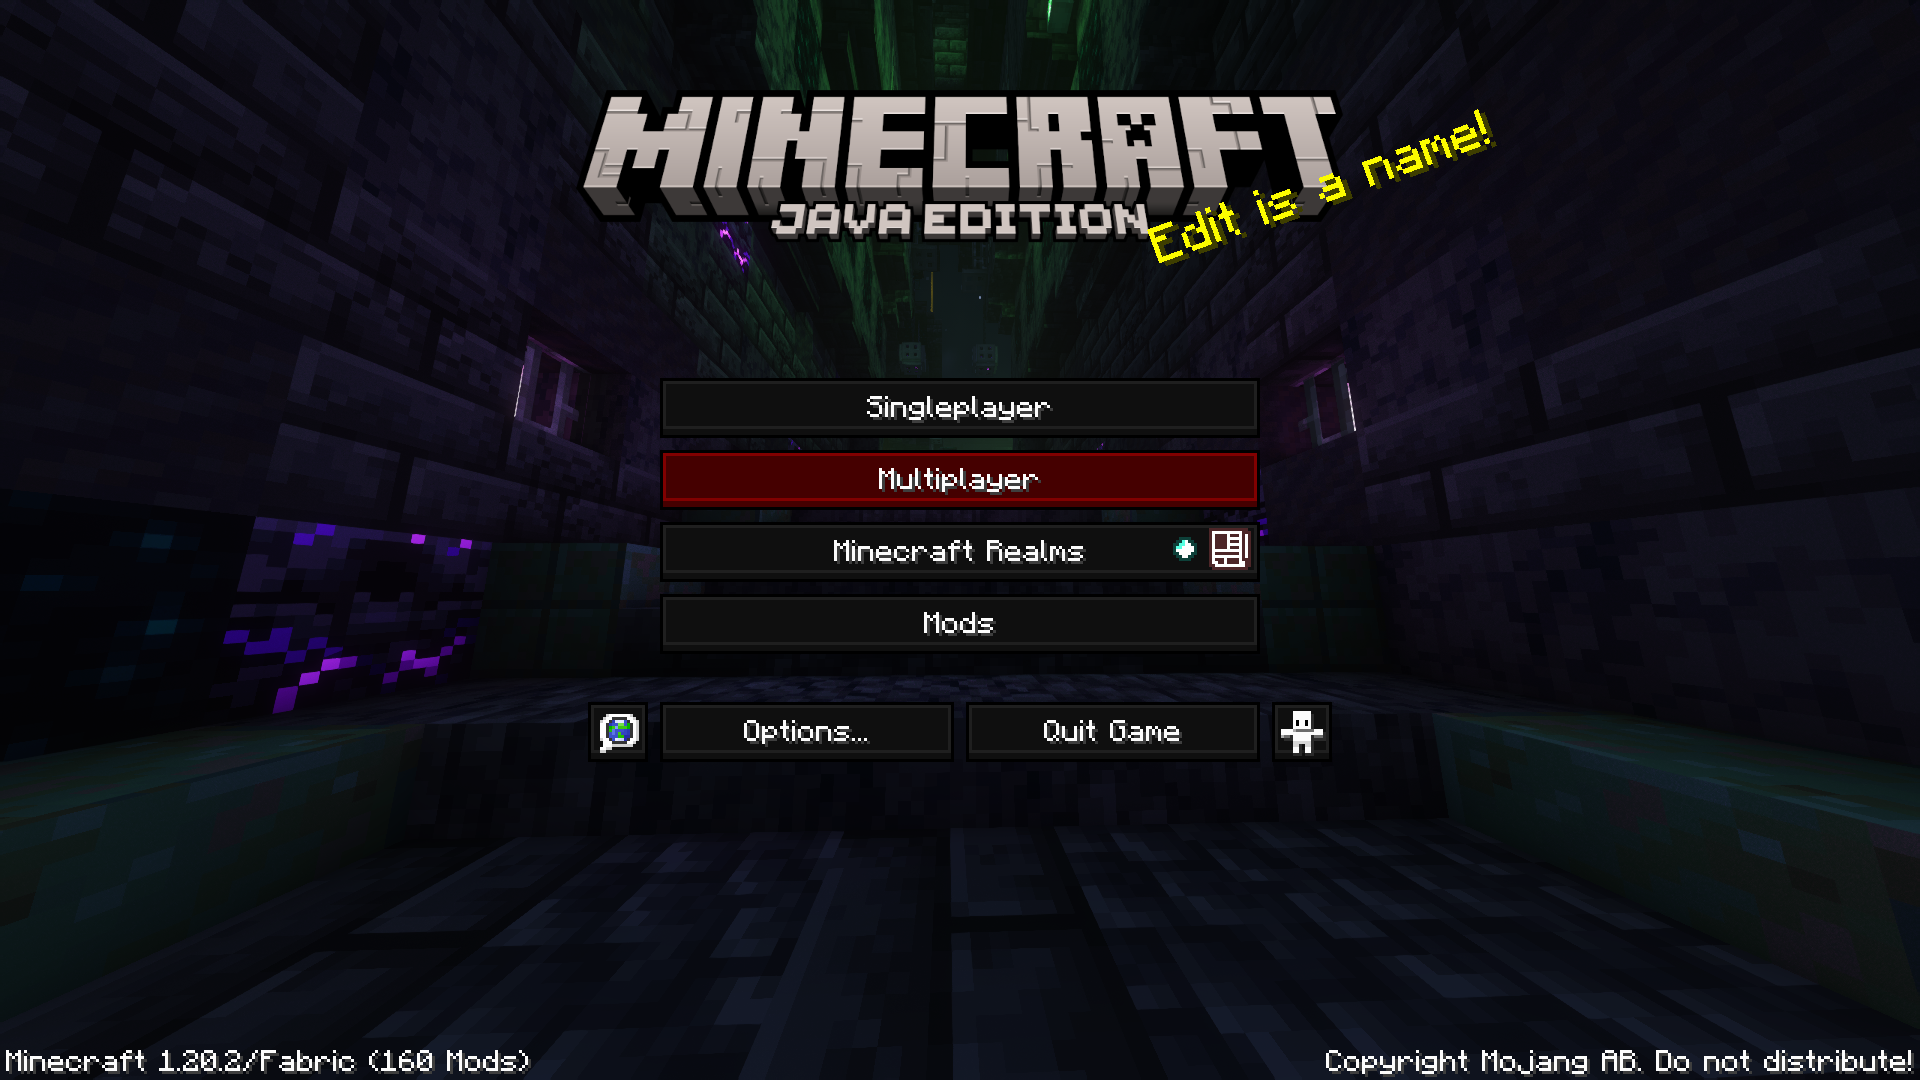 Main menu with the mouse hovering the Multiplayer button